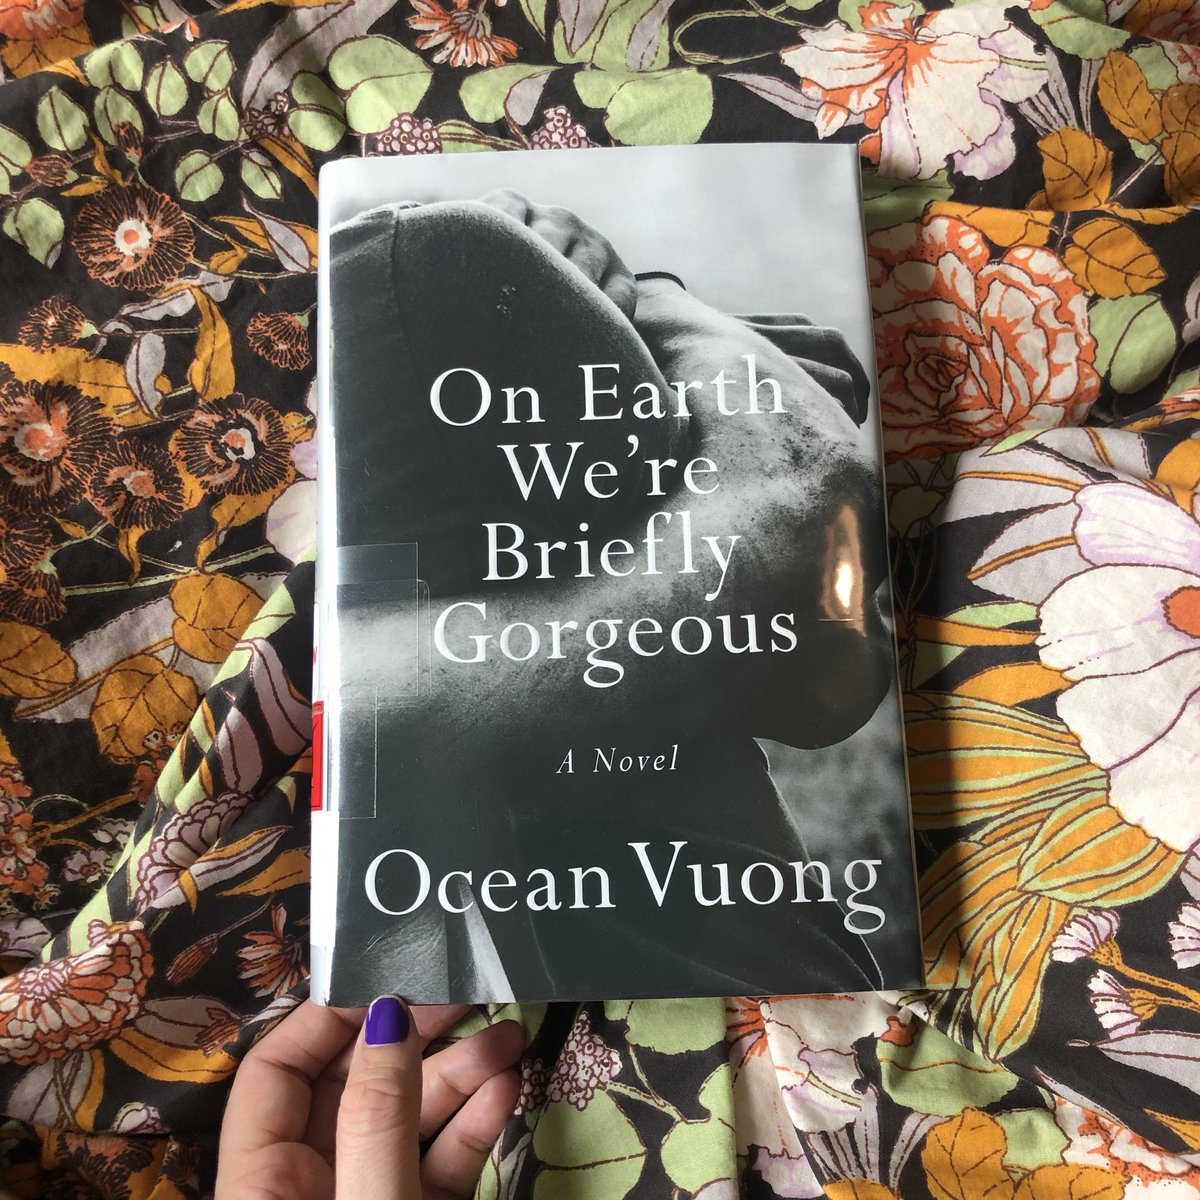 44. On Earth We’re Briefly Gorgeous - Ocean Vuong